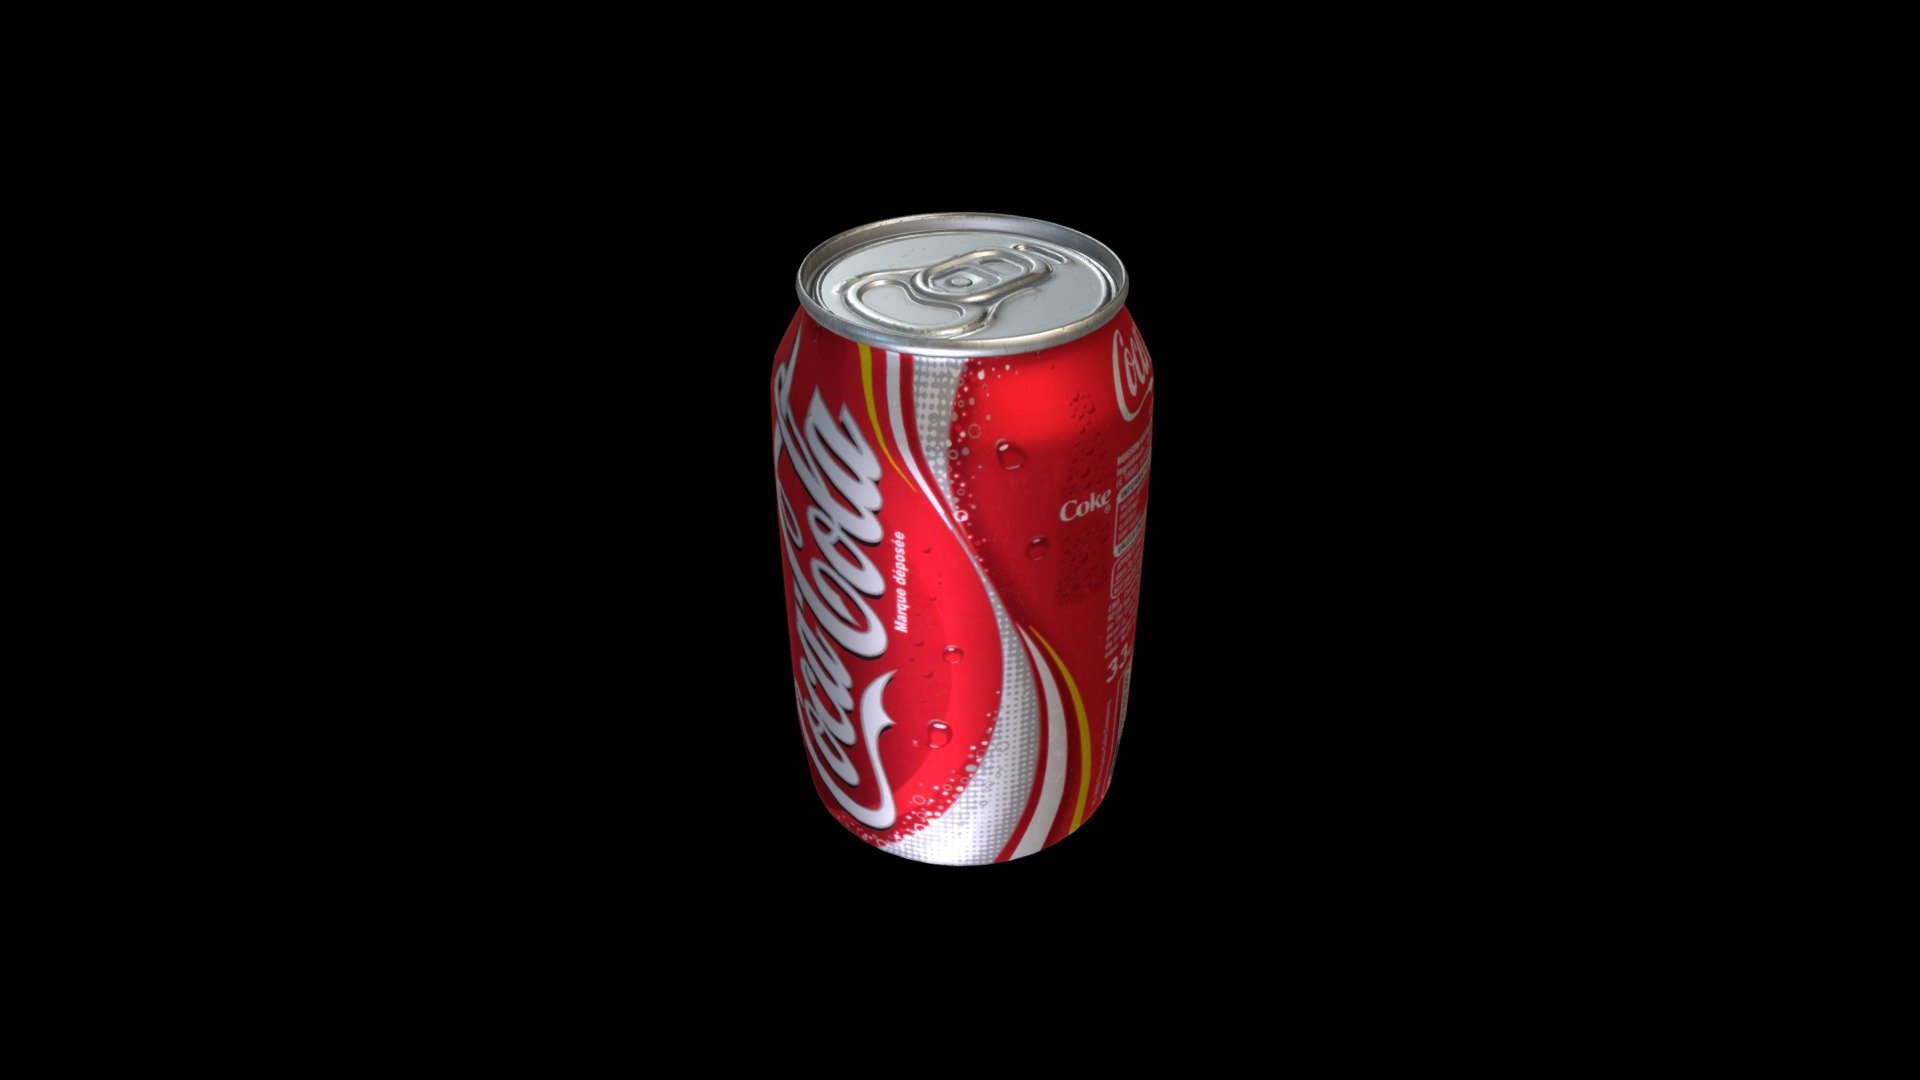 Can of coke high detailed - 4600 verts. You can replace the label with whatever brand you want 3d model